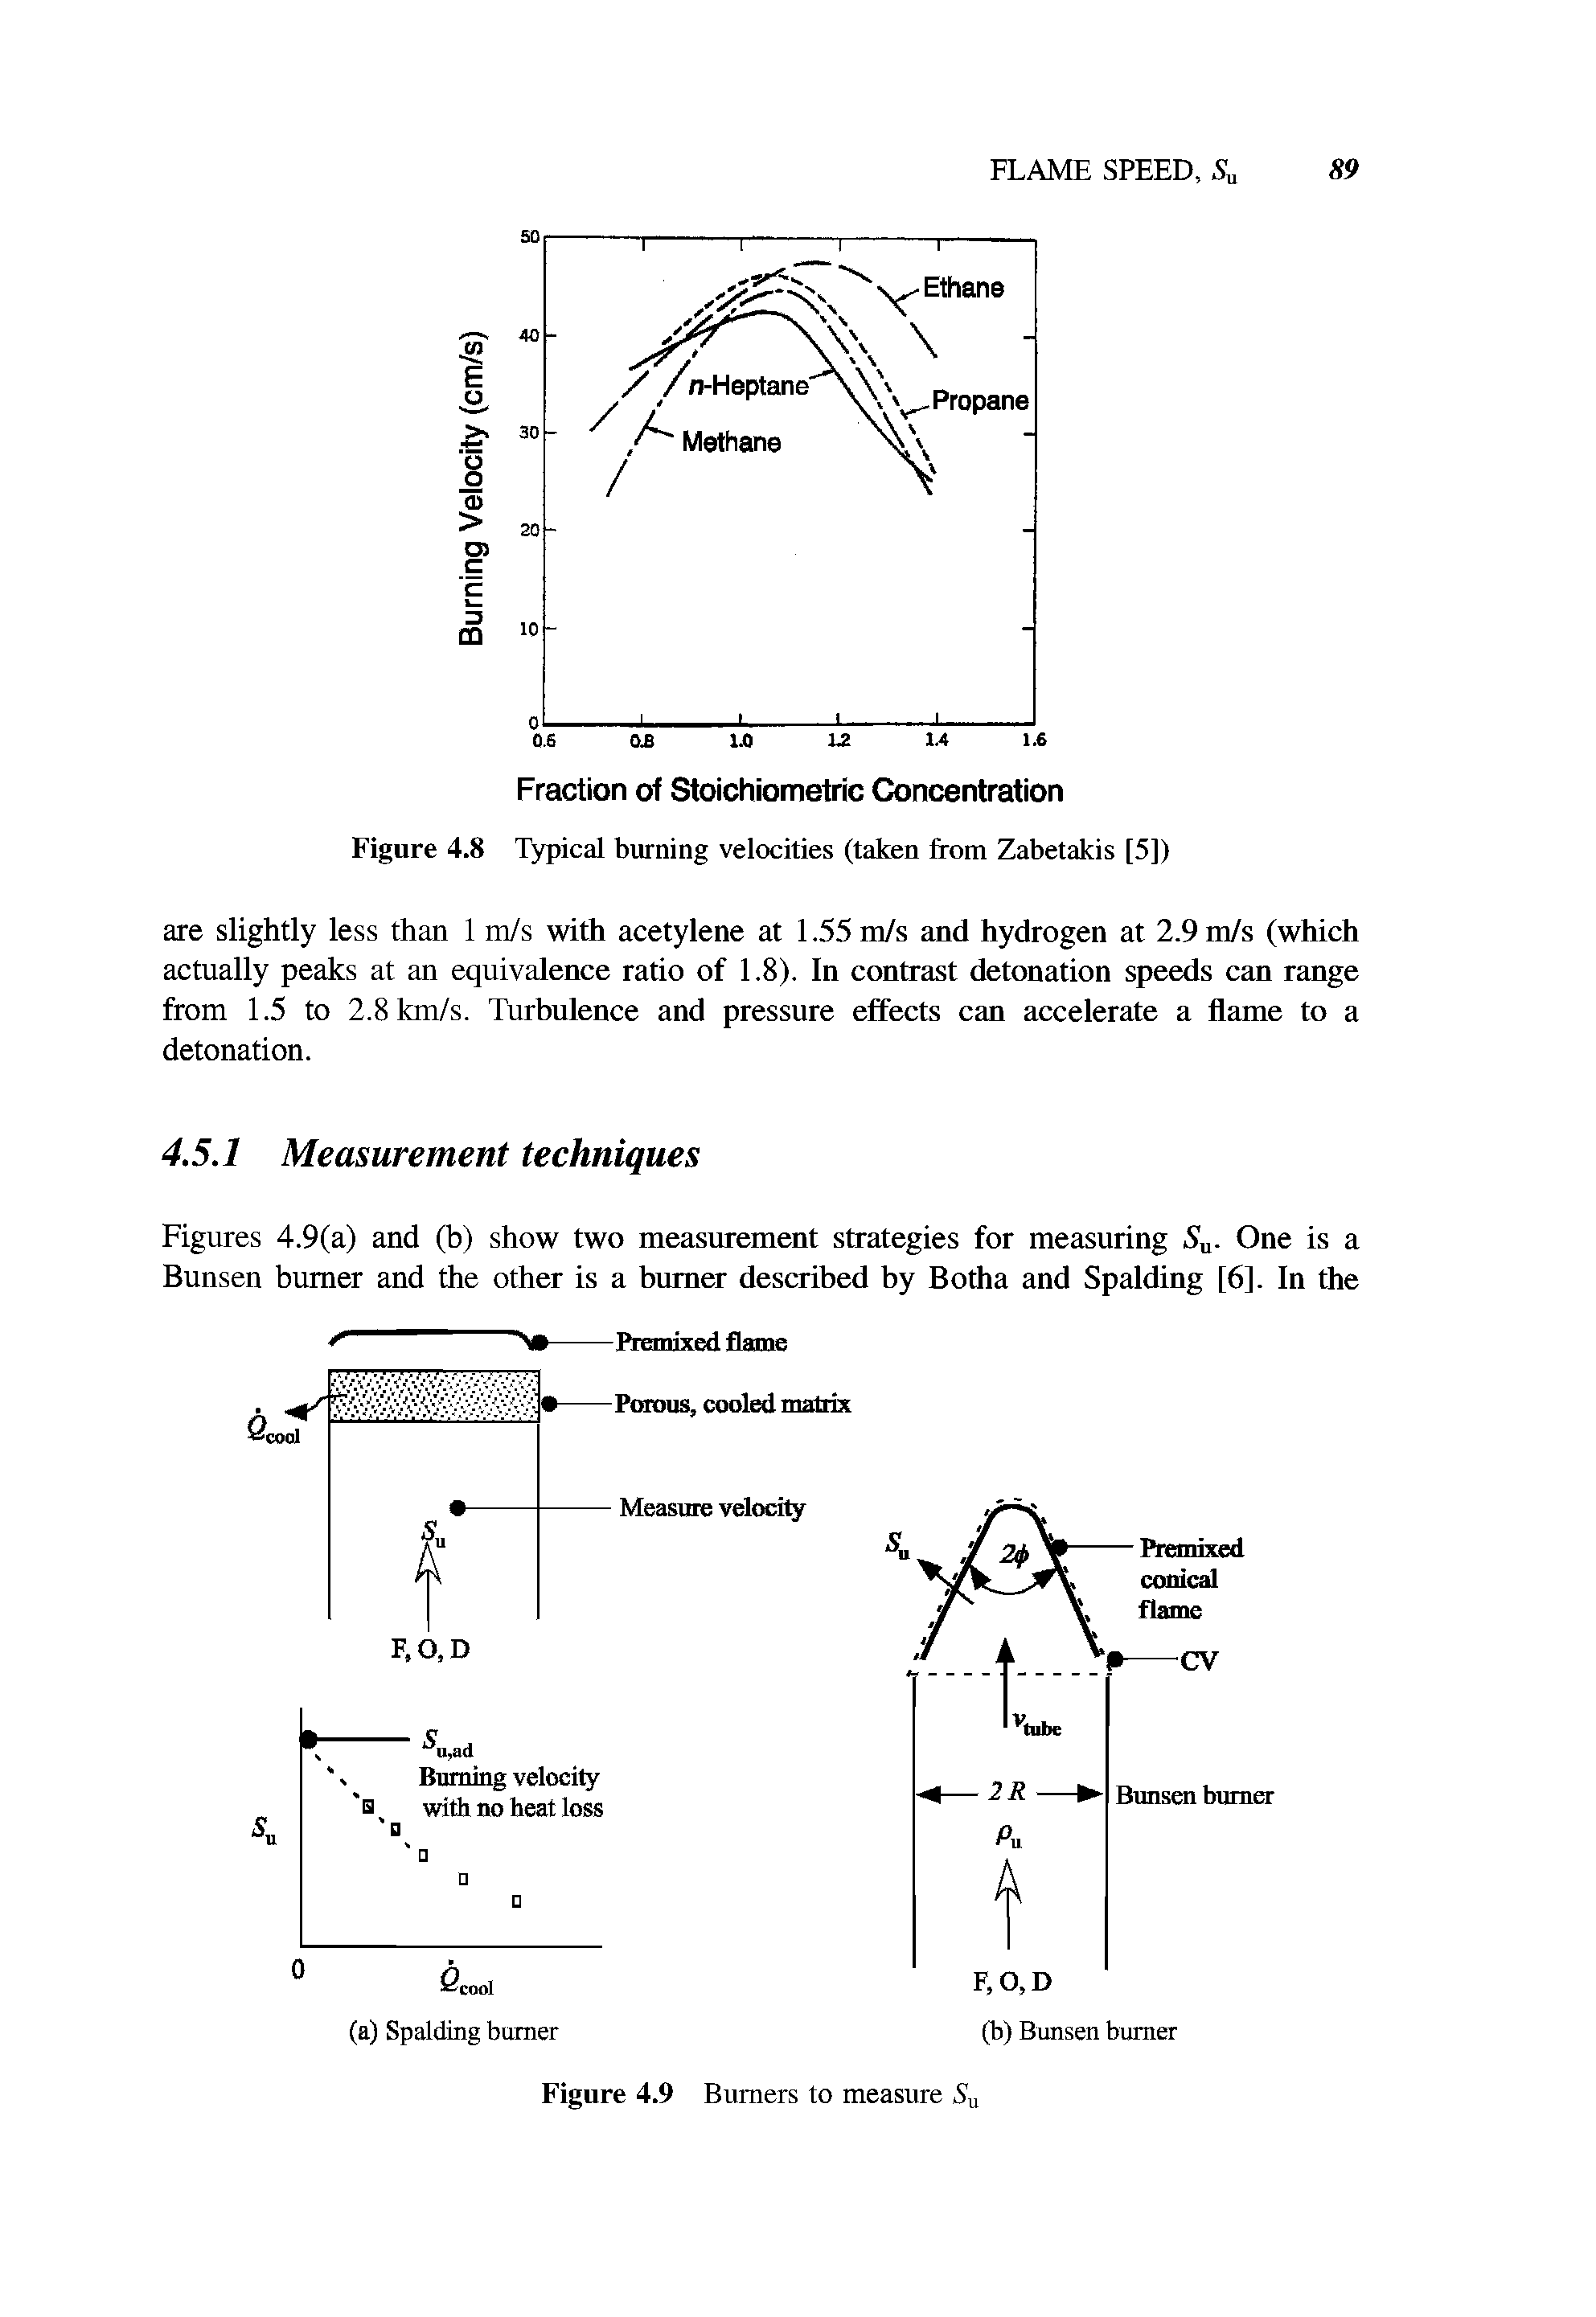 Figures 4.9(a) and (b) show two measurement strategies for measuring Su. One is a Bunsen burner and the other is a burner described by Botha and Spalding [6]. In the...